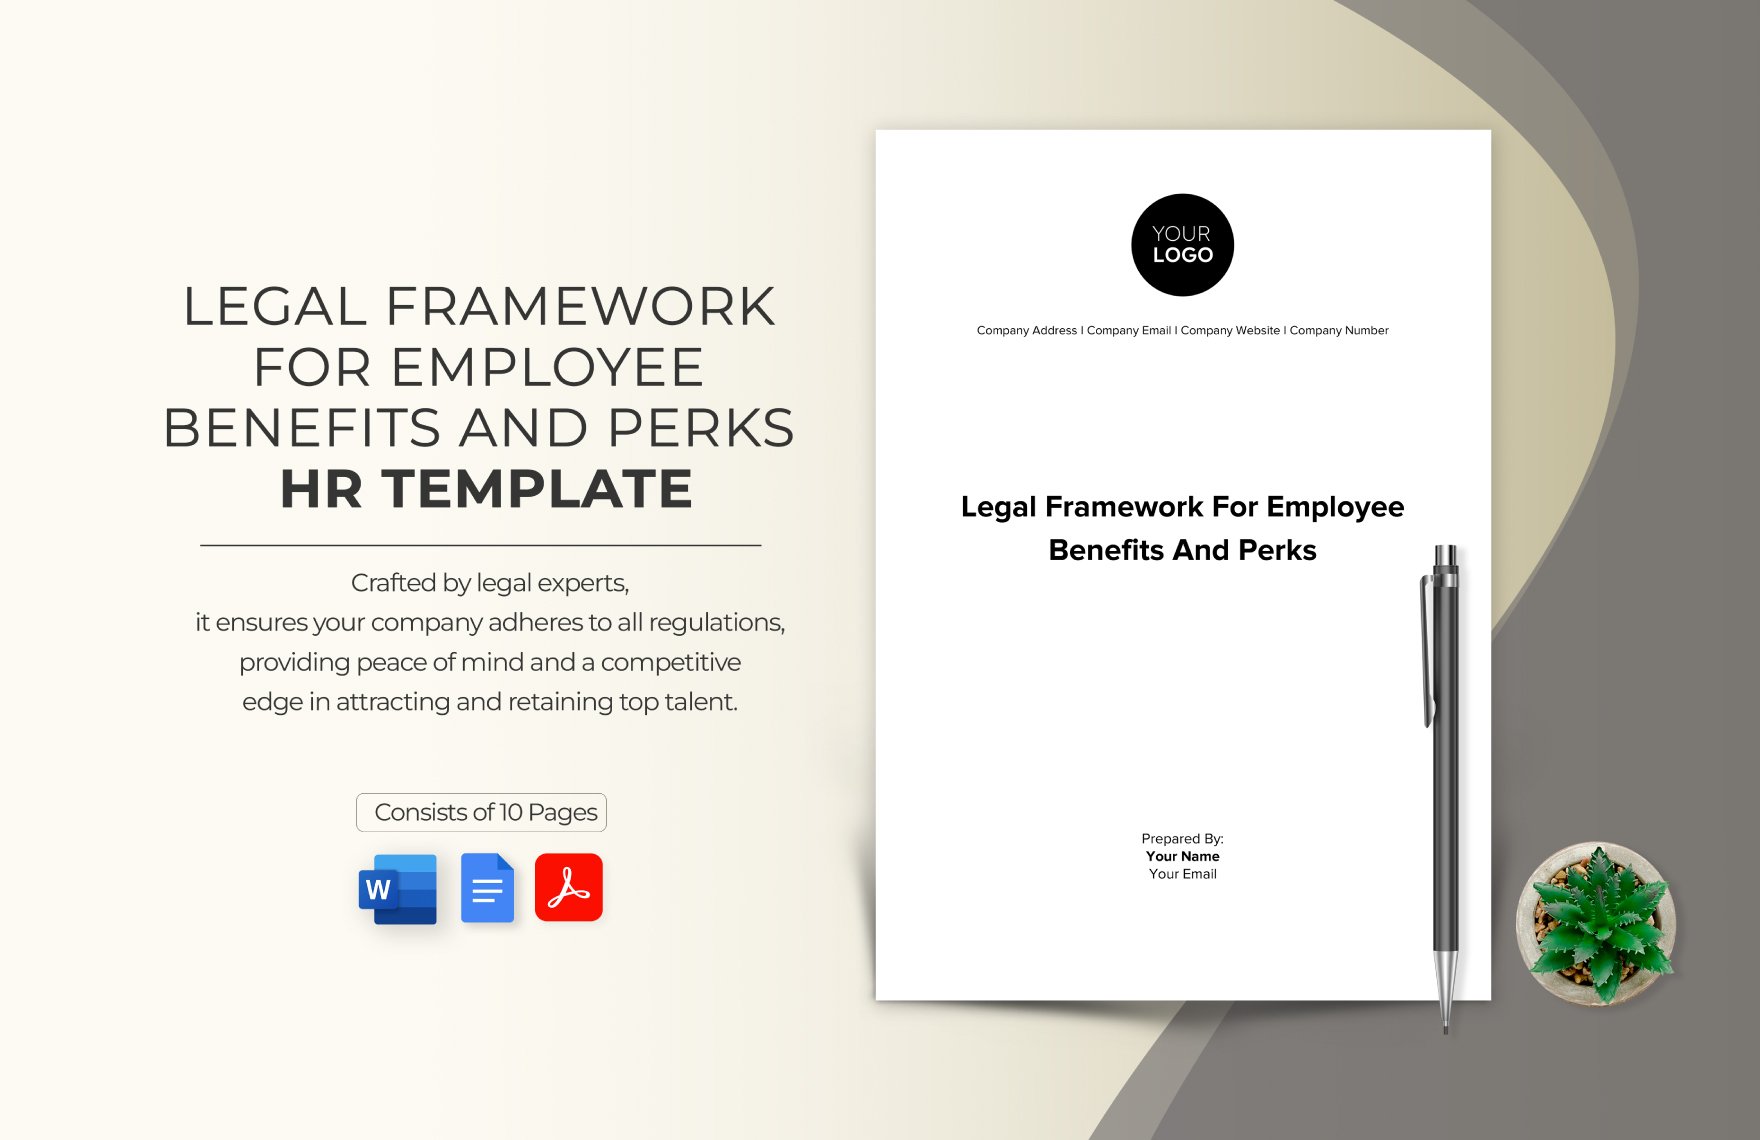 Legal Framework for Employee Benefits and Perks HR Template